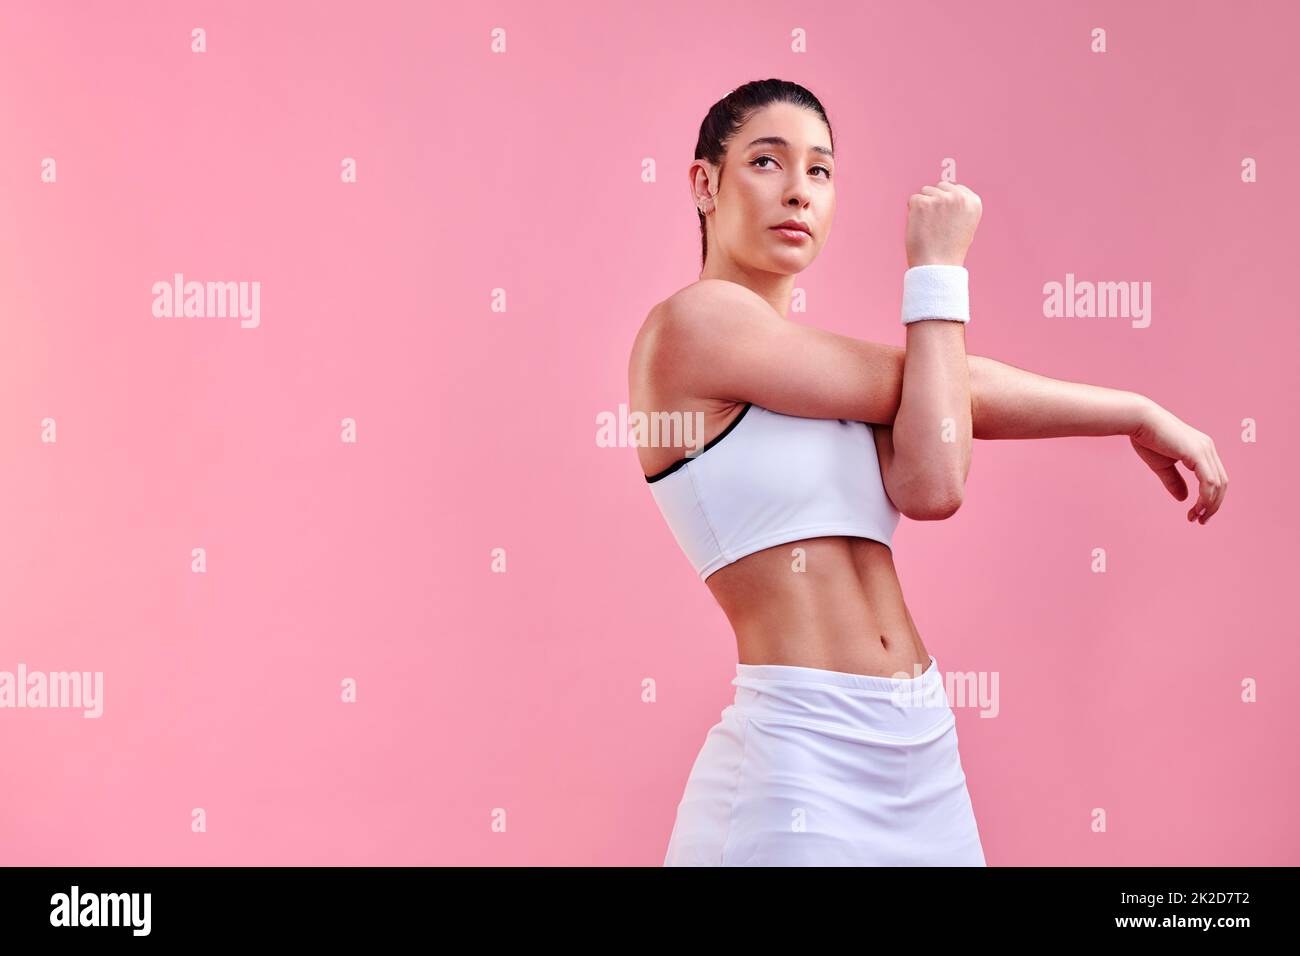 Making excuses will get you nowhere. Studio shot of a sporty young woman stretching her arms against a pink background. Stock Photo